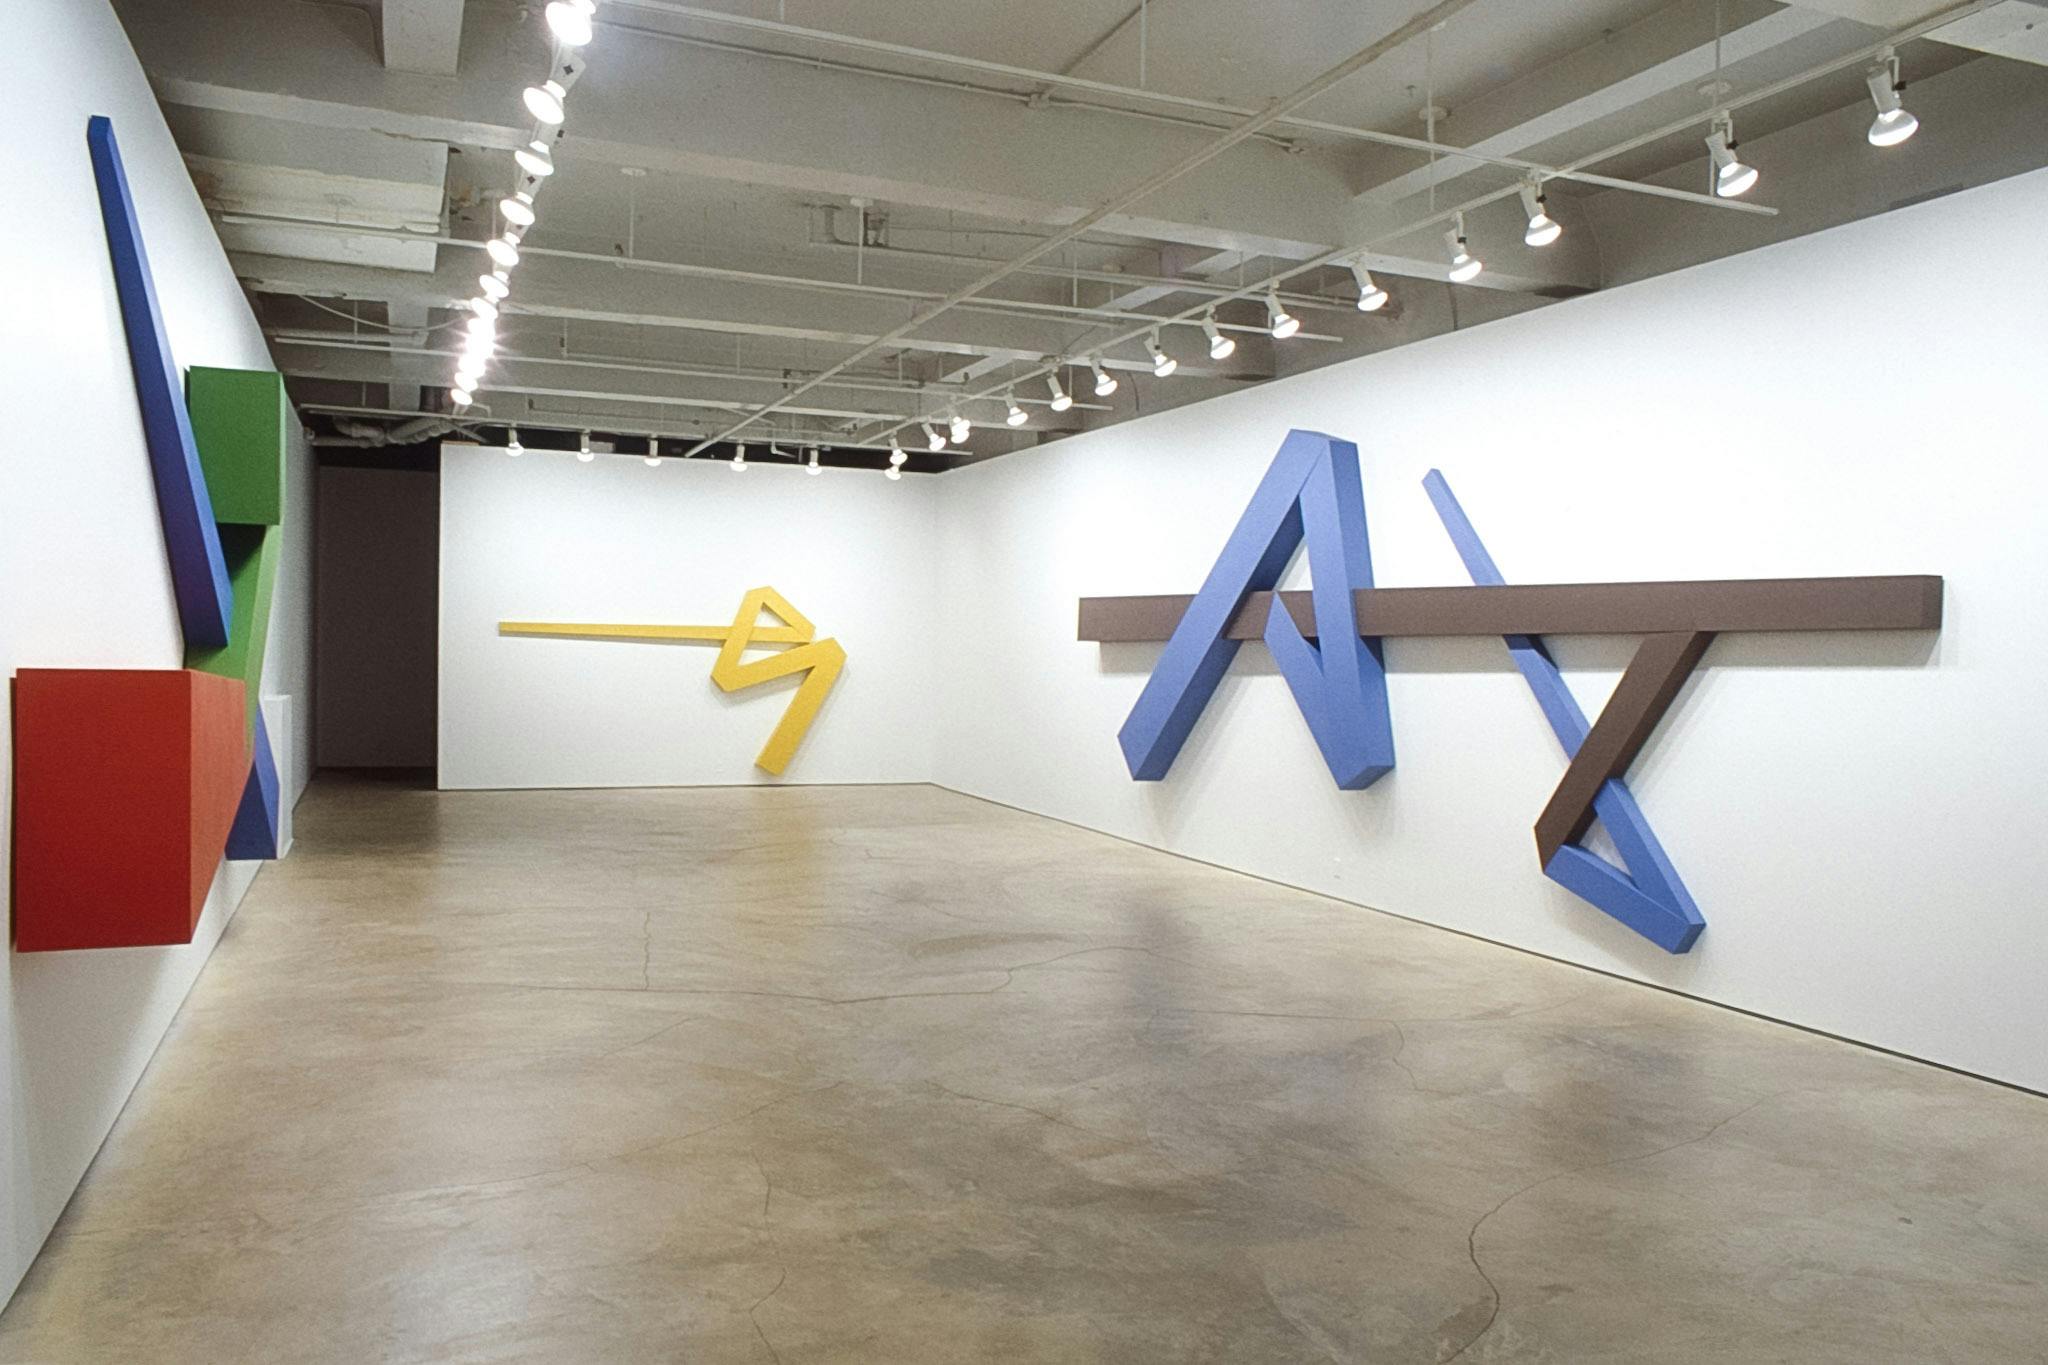 Three large-sized geometric sculptures are mounted on the gallery walls. The one on the right is composed of blue and dark-brown colored shapes. The middle piece is yellow. 